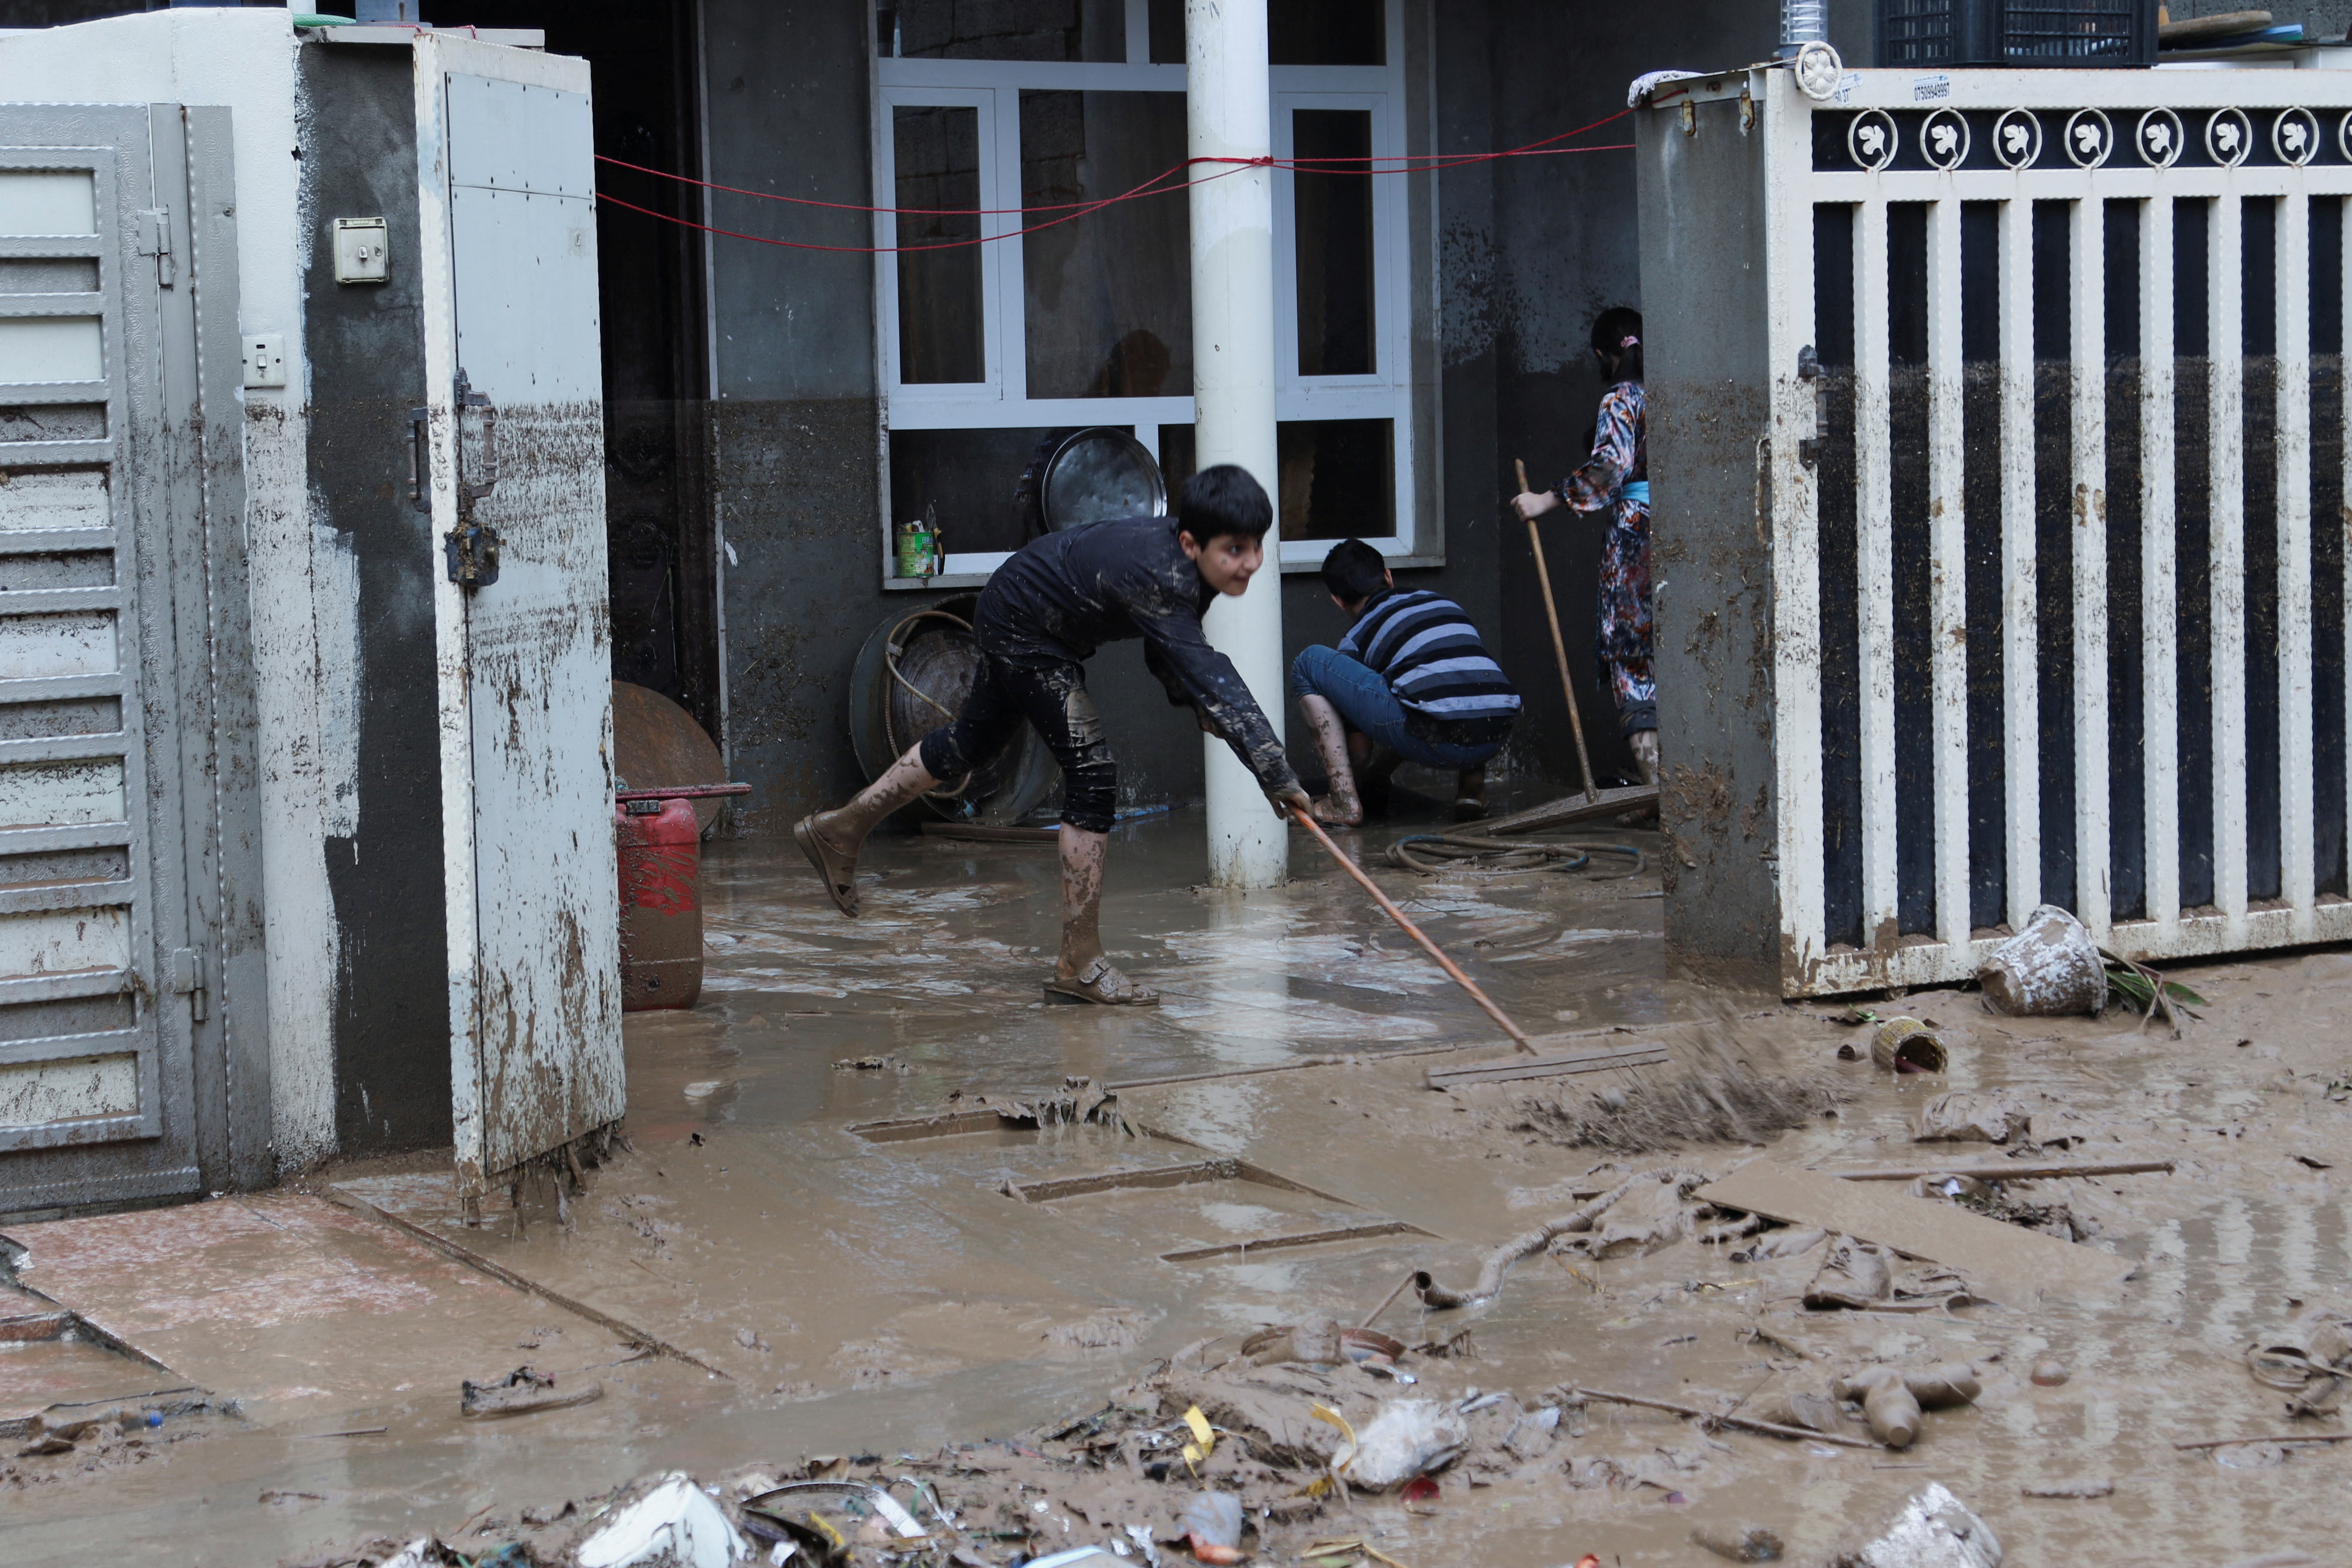 Residents are seen cleaning a home after heavy rainfall in Erbil